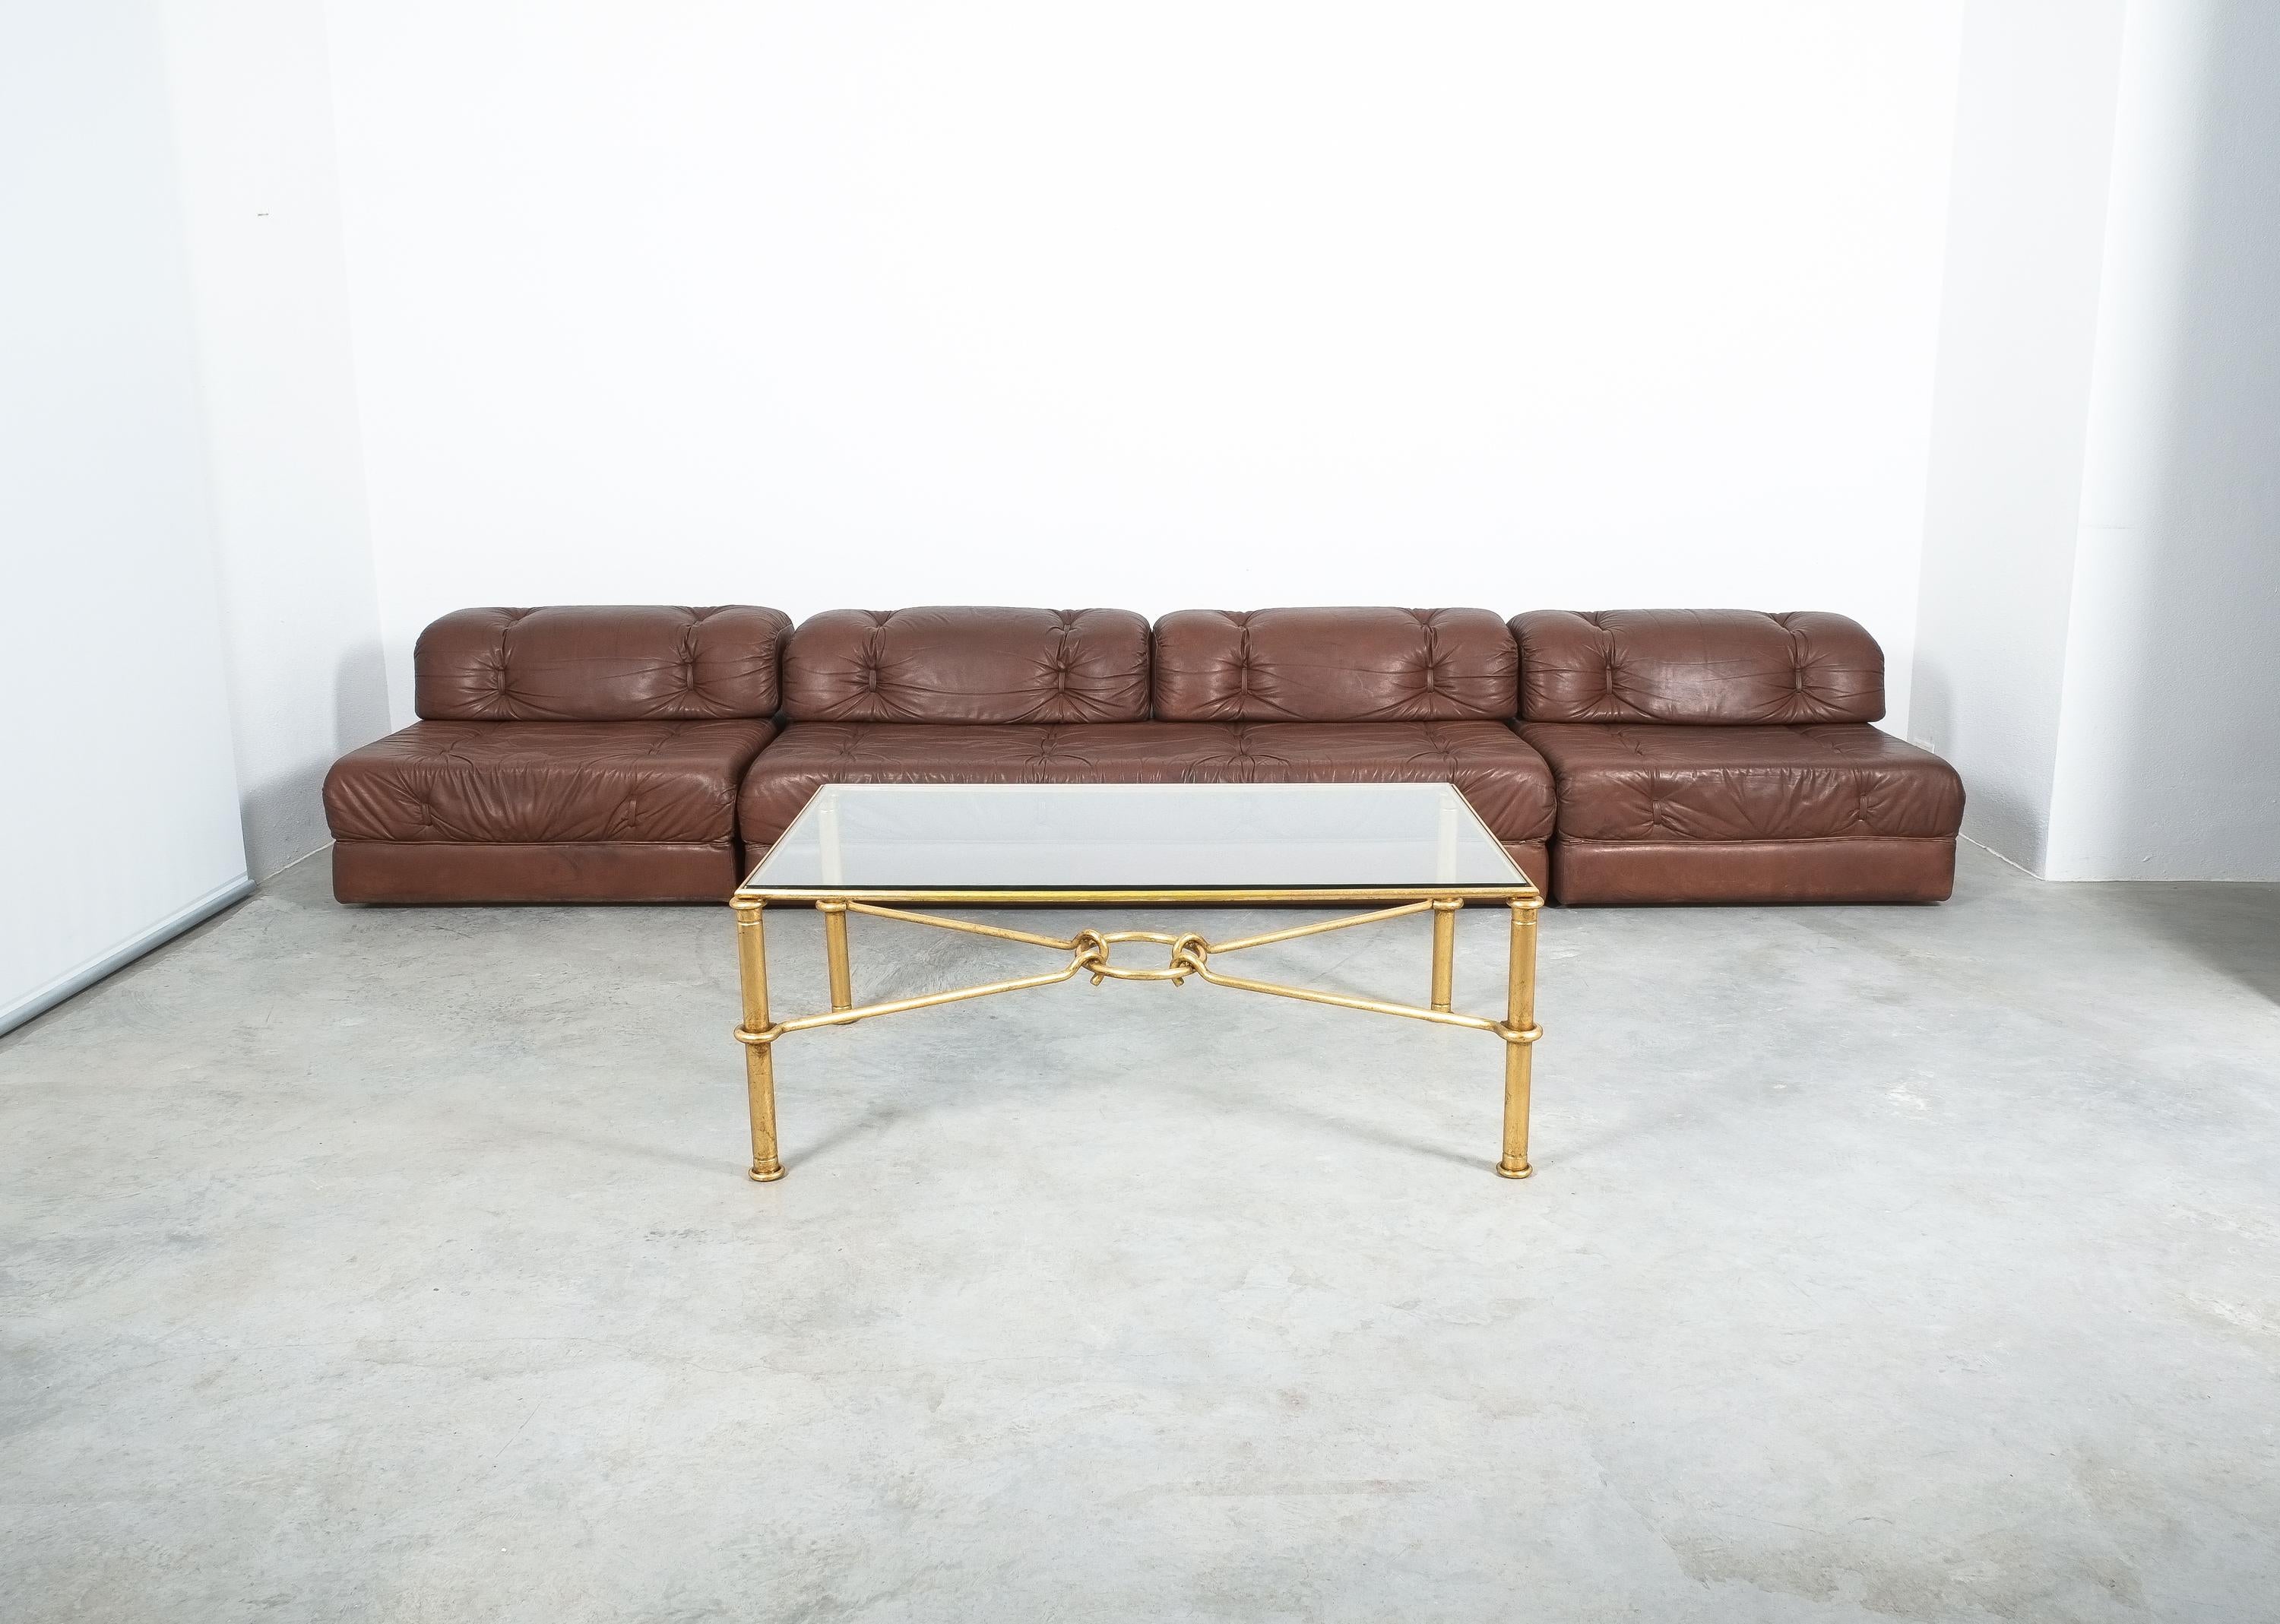 French Hermes Gilt Iron Coffee Table by Giovanni Banci, Italy, Midcentury